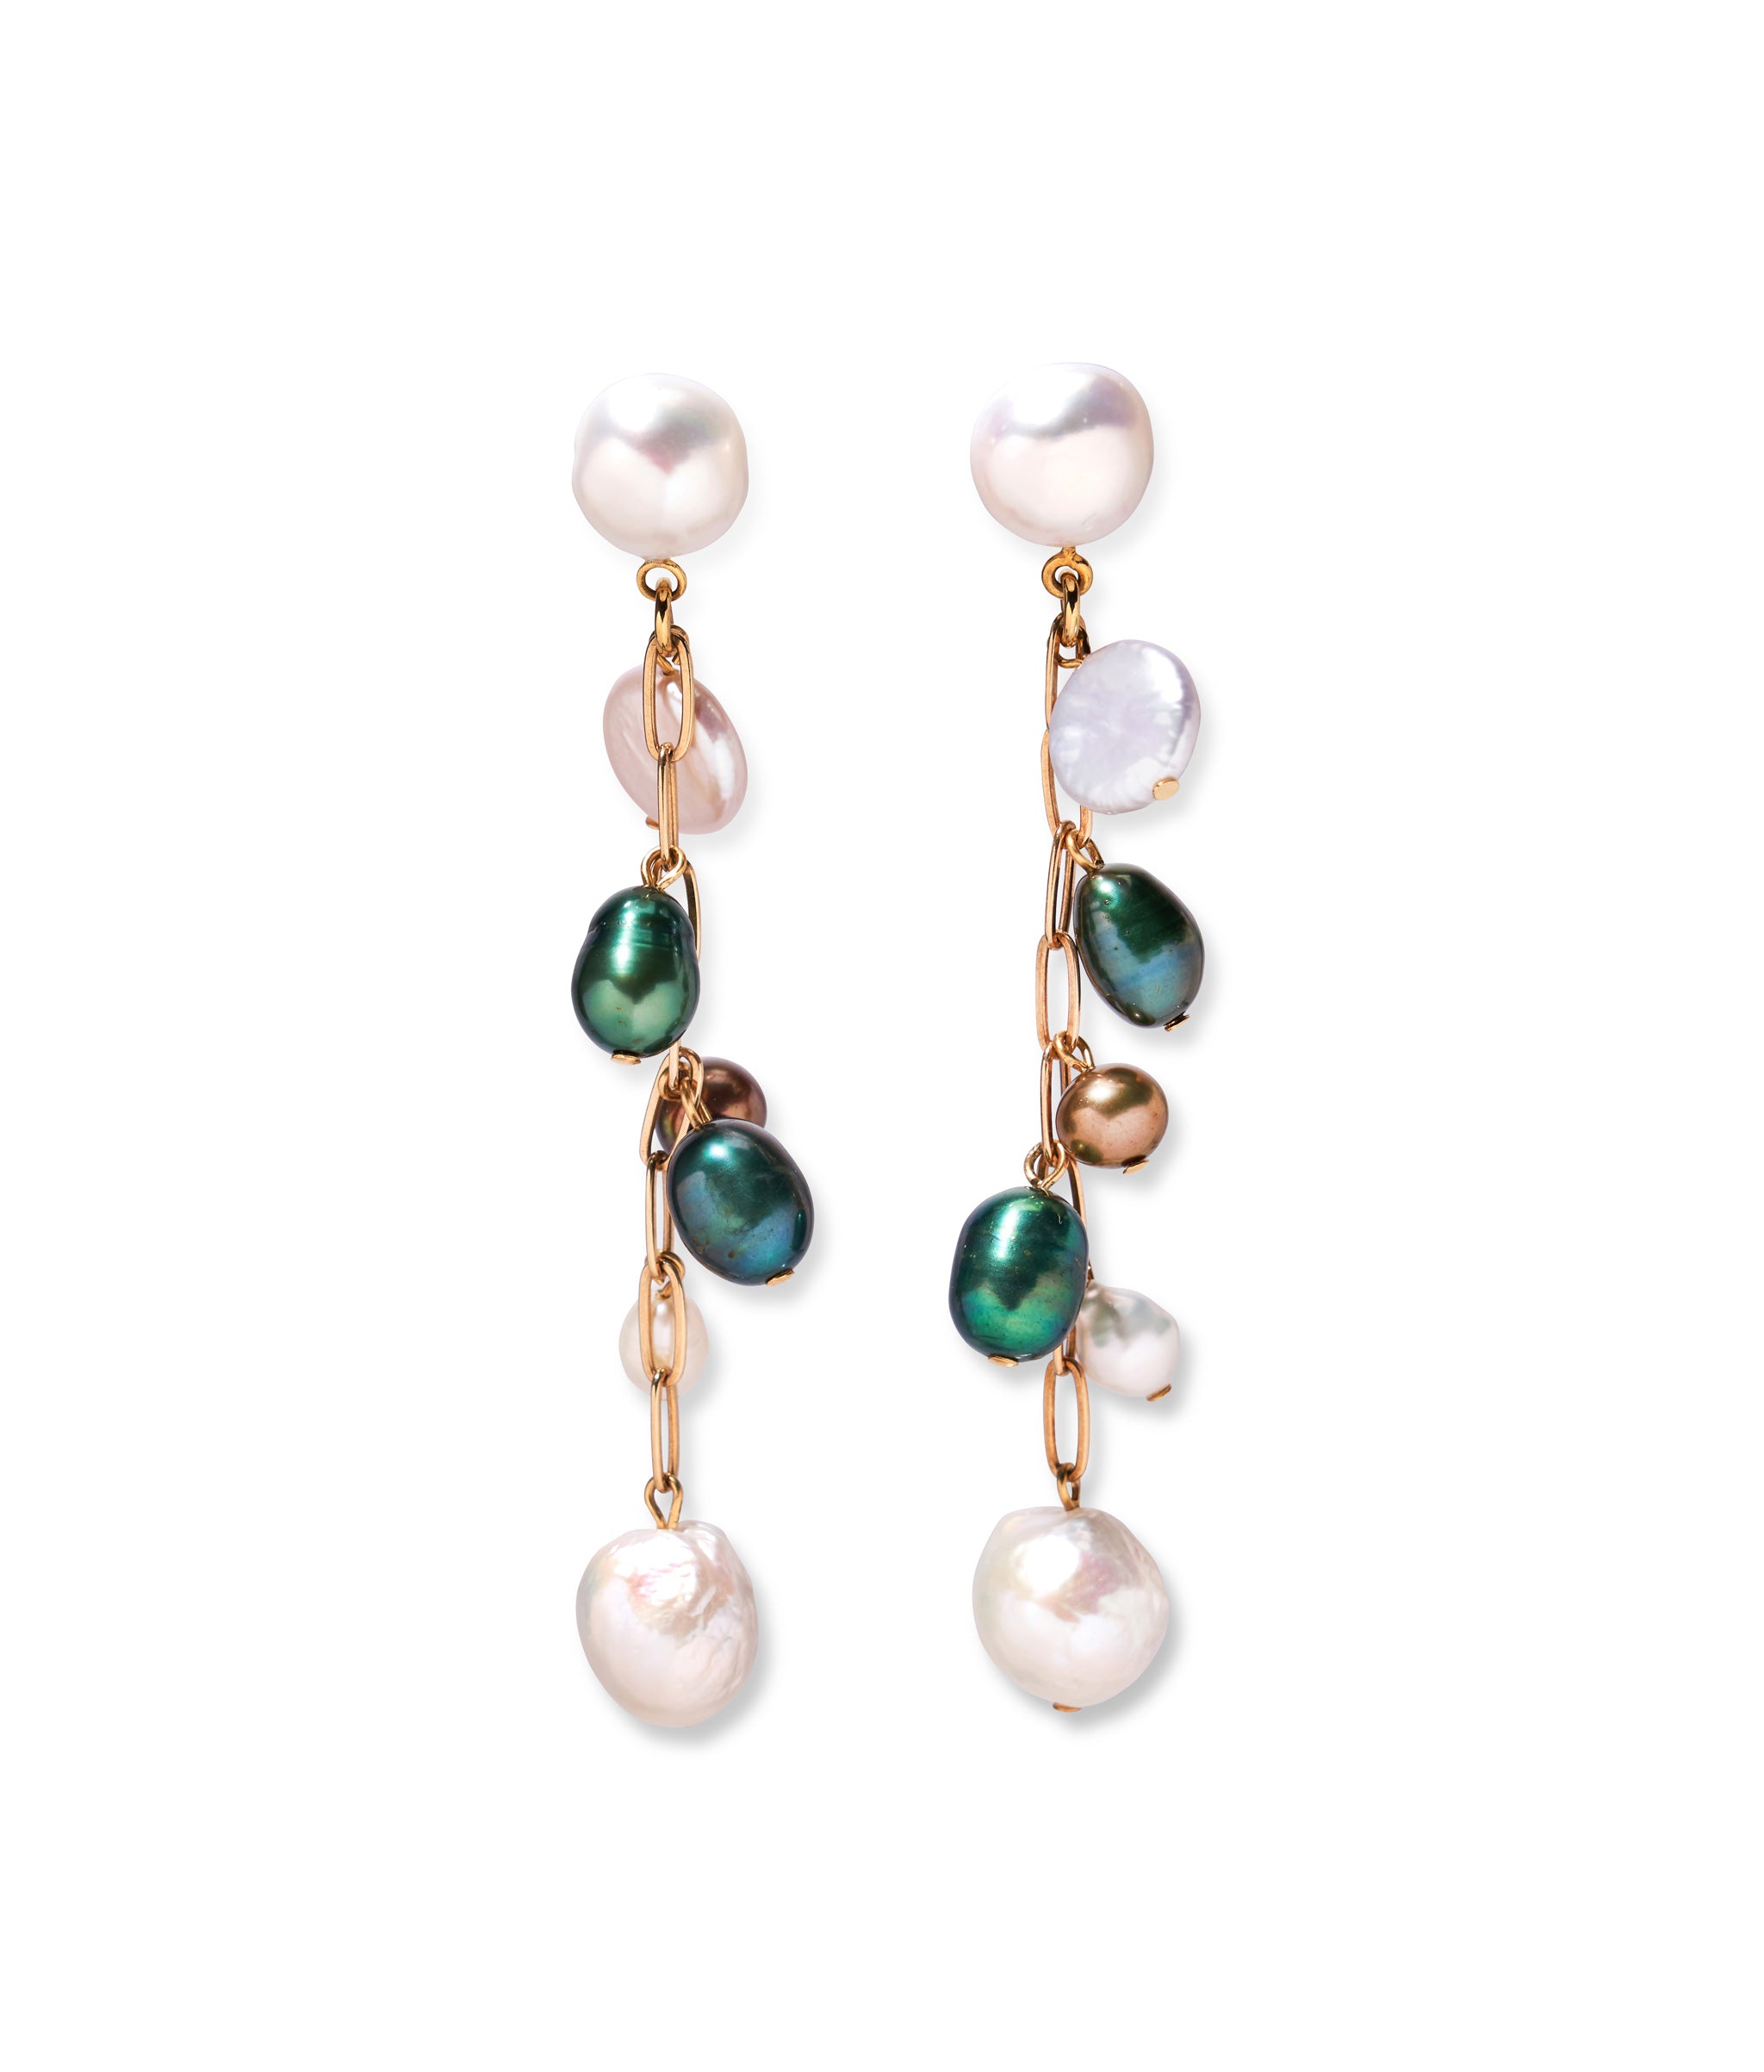 Lighting Field Earrings. Gold-plated chain with pearl tops and hanging white, gray, and green freshwater pearls.